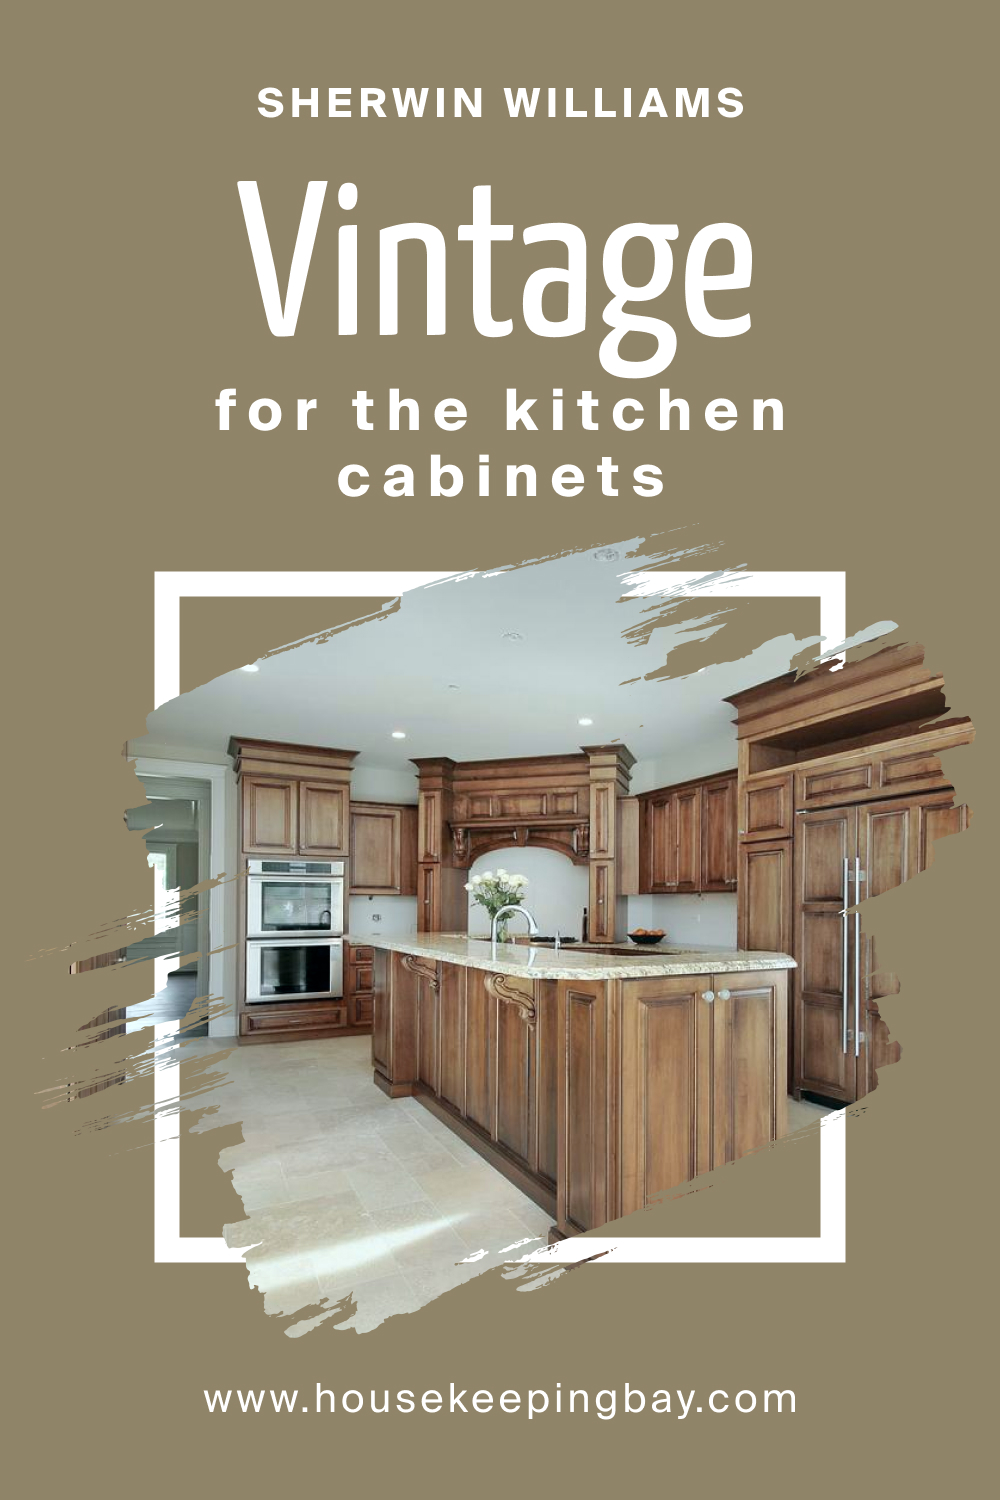 Sherwin Williams. SW 9528 Vintage For the Kitchen Cabinets